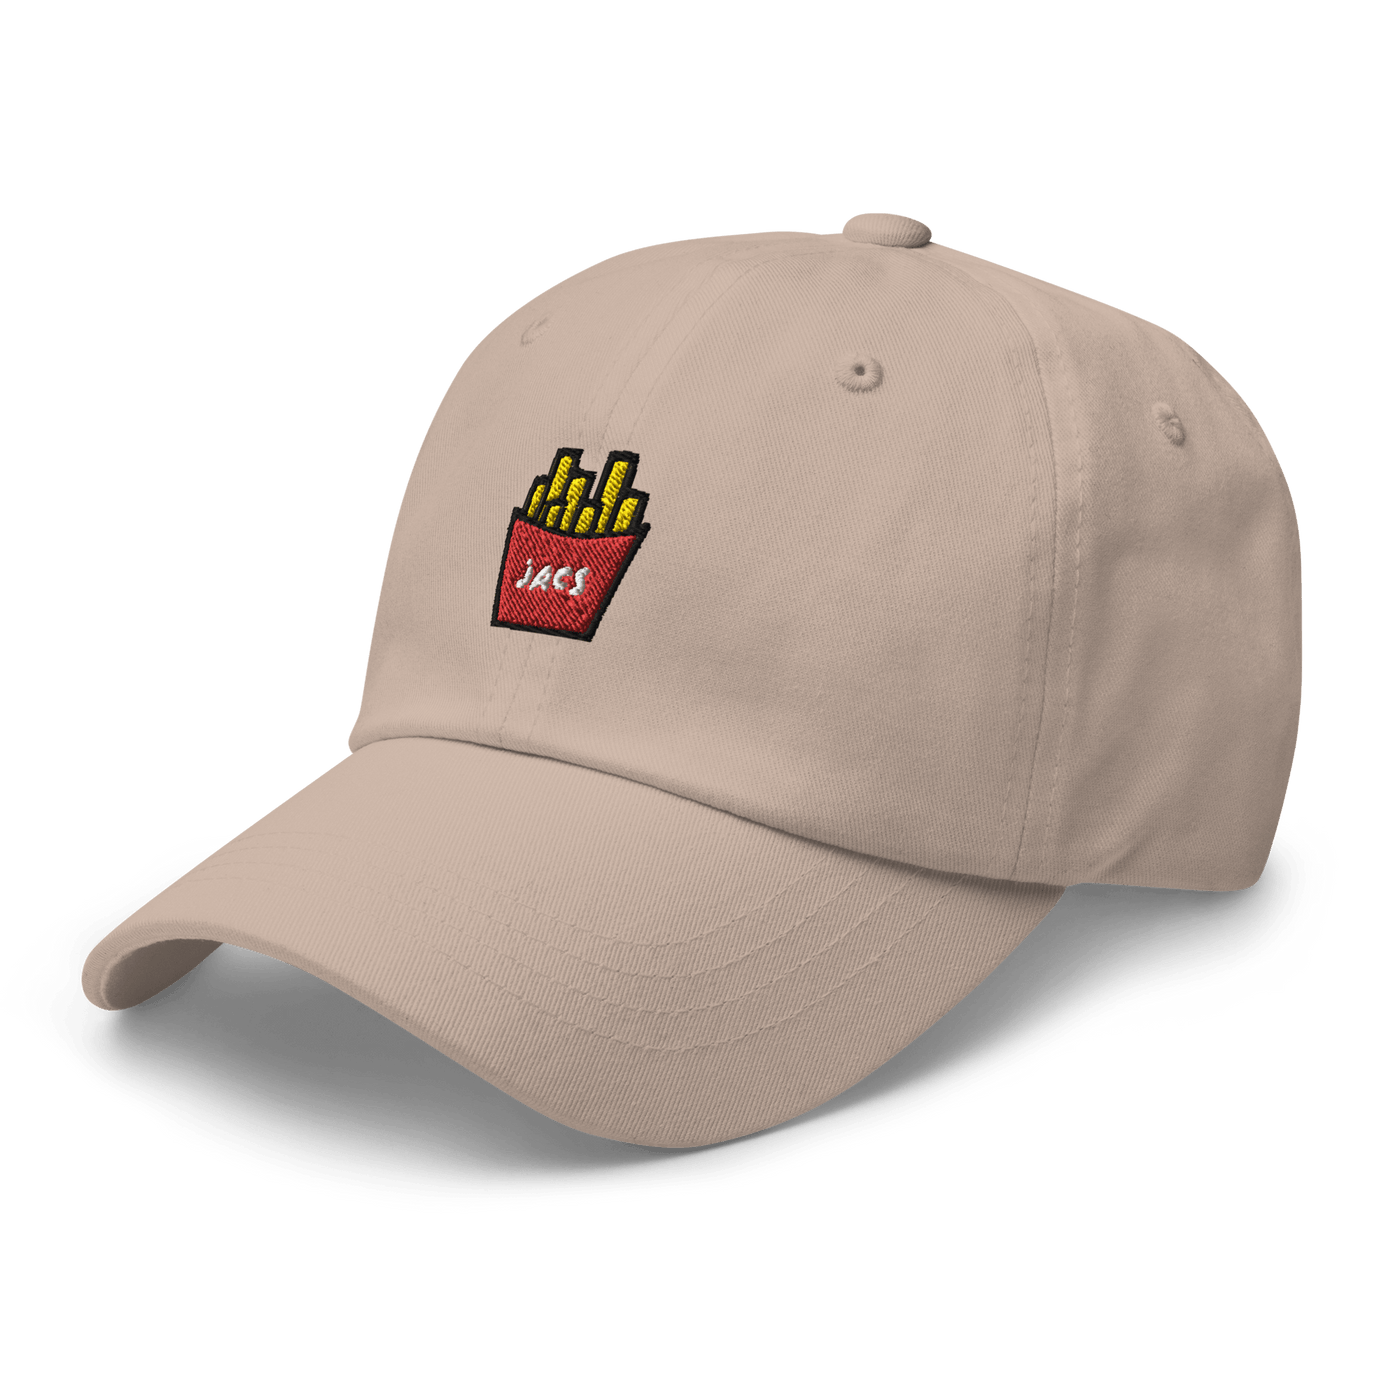 JACS Fries Dad hat - Stone - - Just Another Cap Store